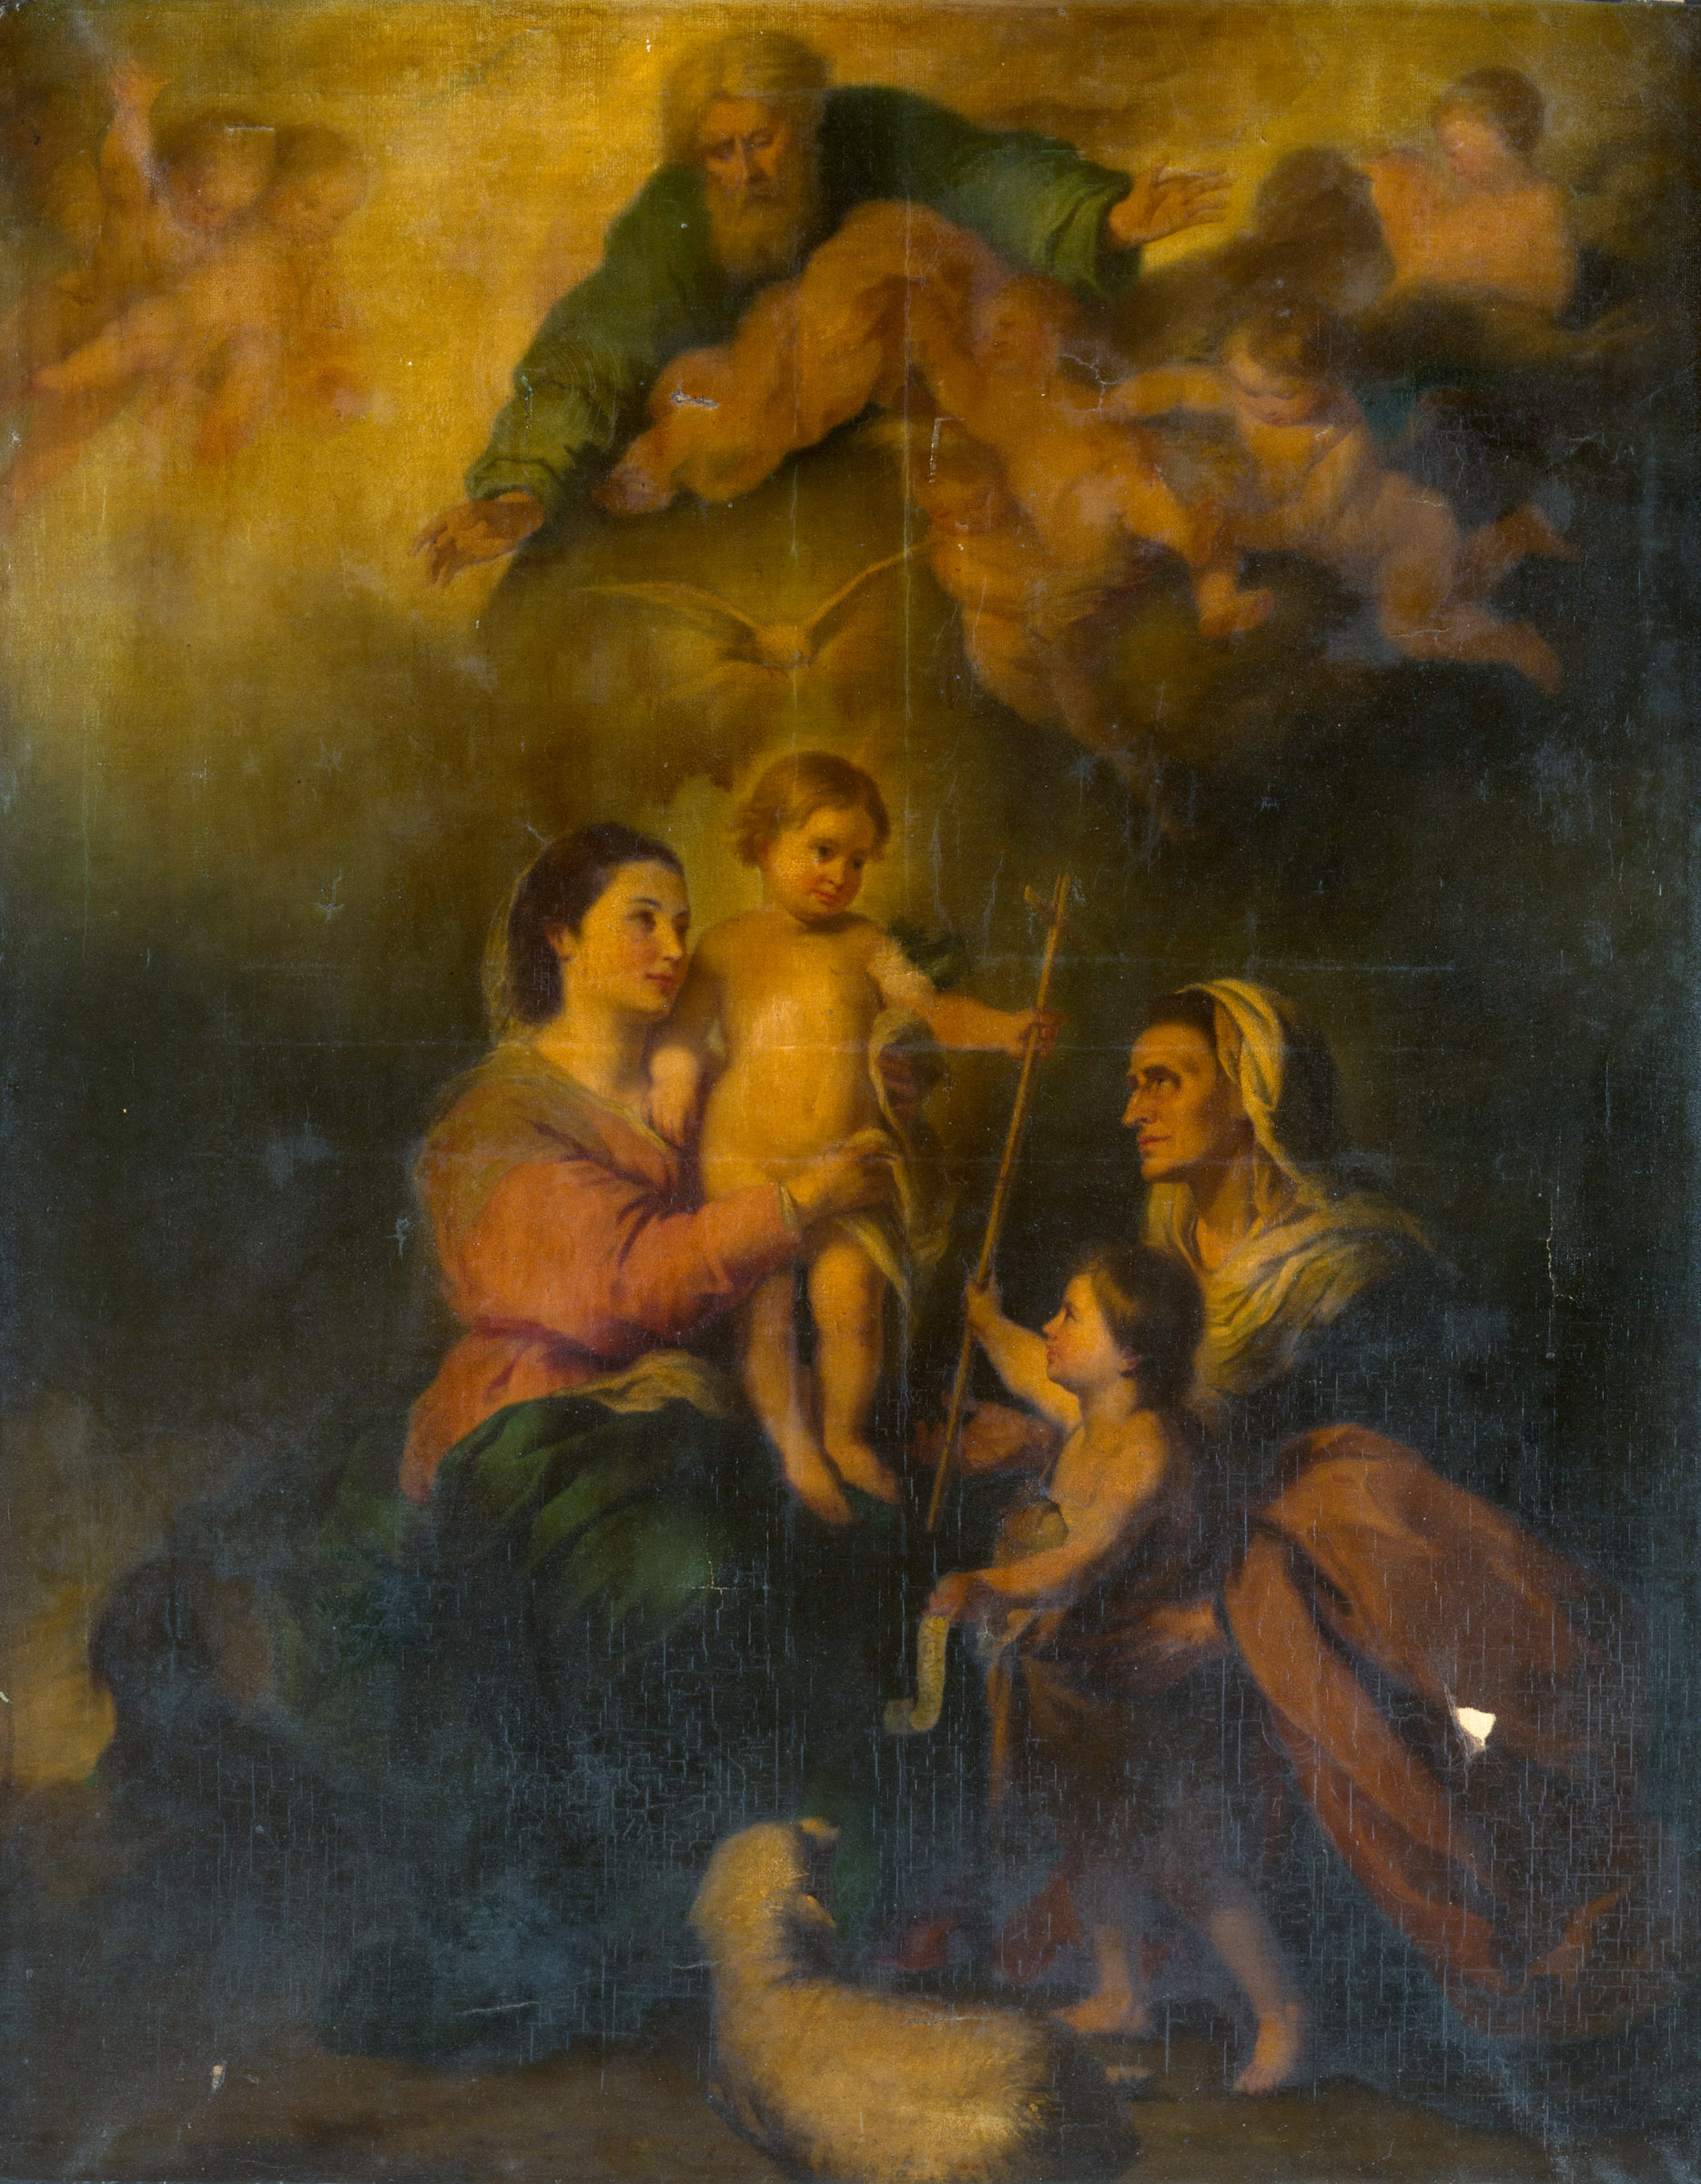 AFTER BARTOLOME ESTEBAN MURILLO (1628-1682) THE VIRGIN AND CHILD WITH ST. ANNE, ST. JOHN THE BAPTIST